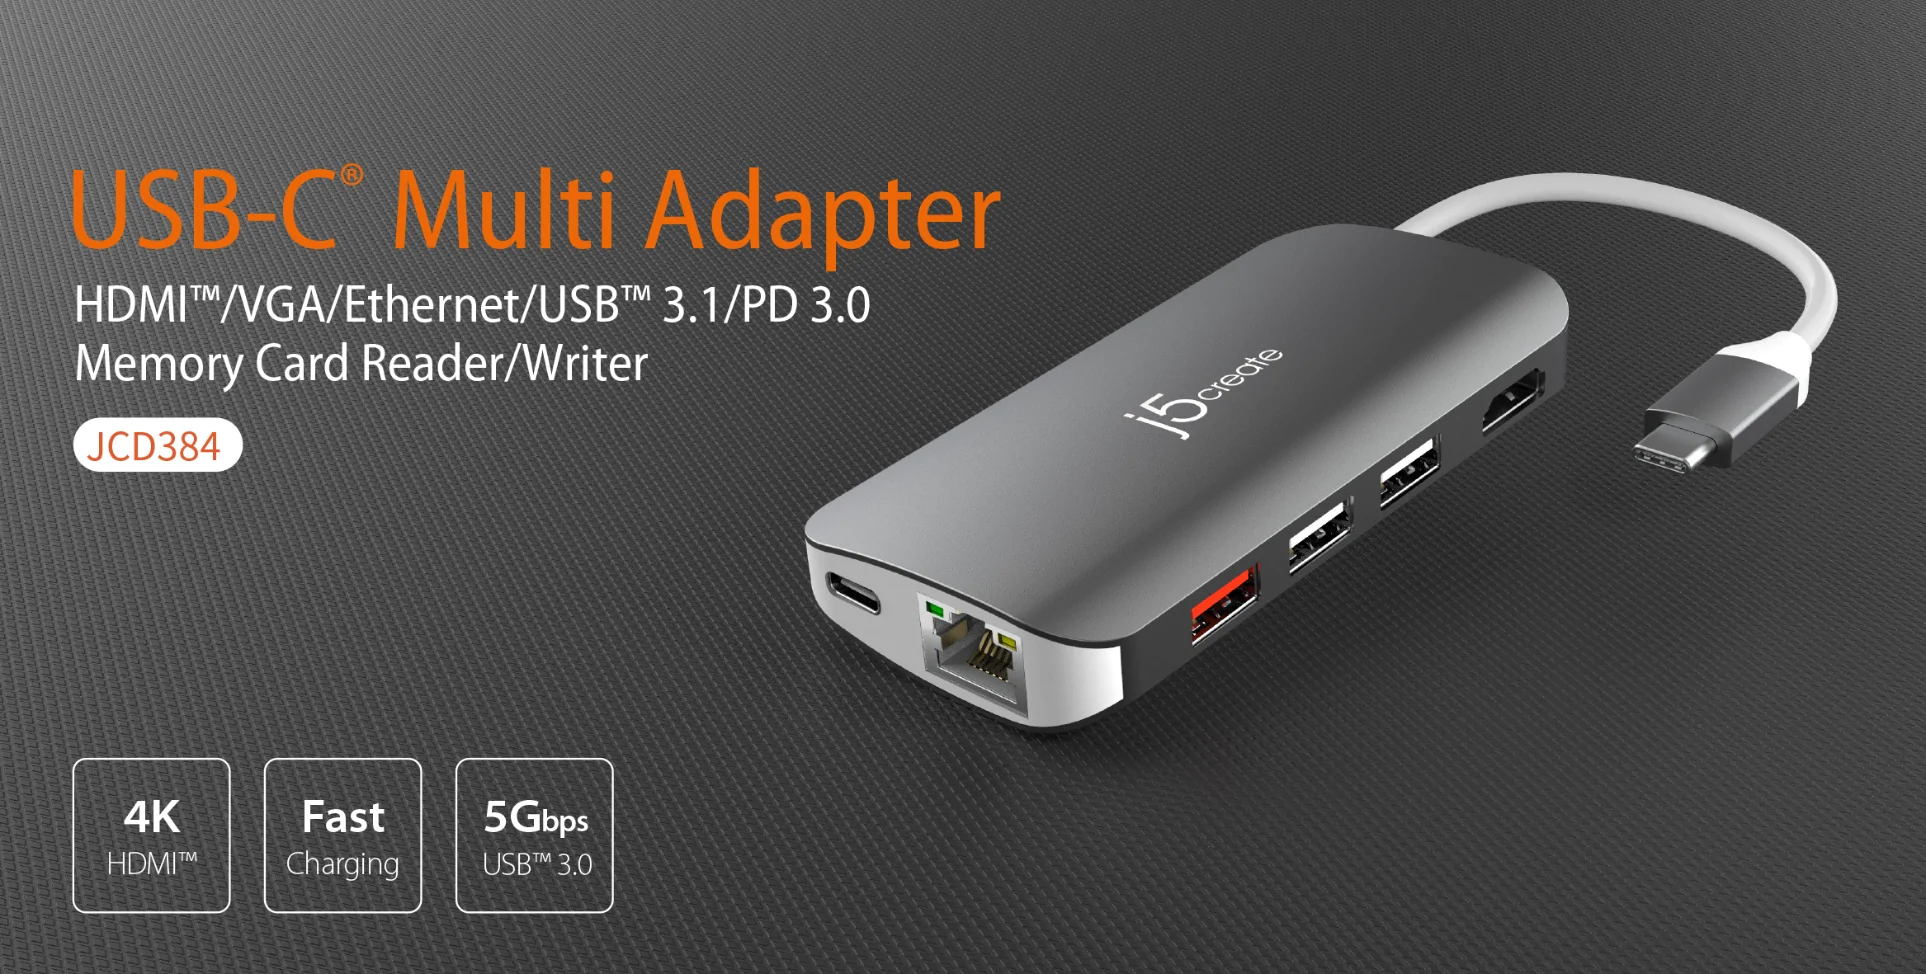 J5 Create USB C Multi Adapter -10 Functions in 1 - JCD384